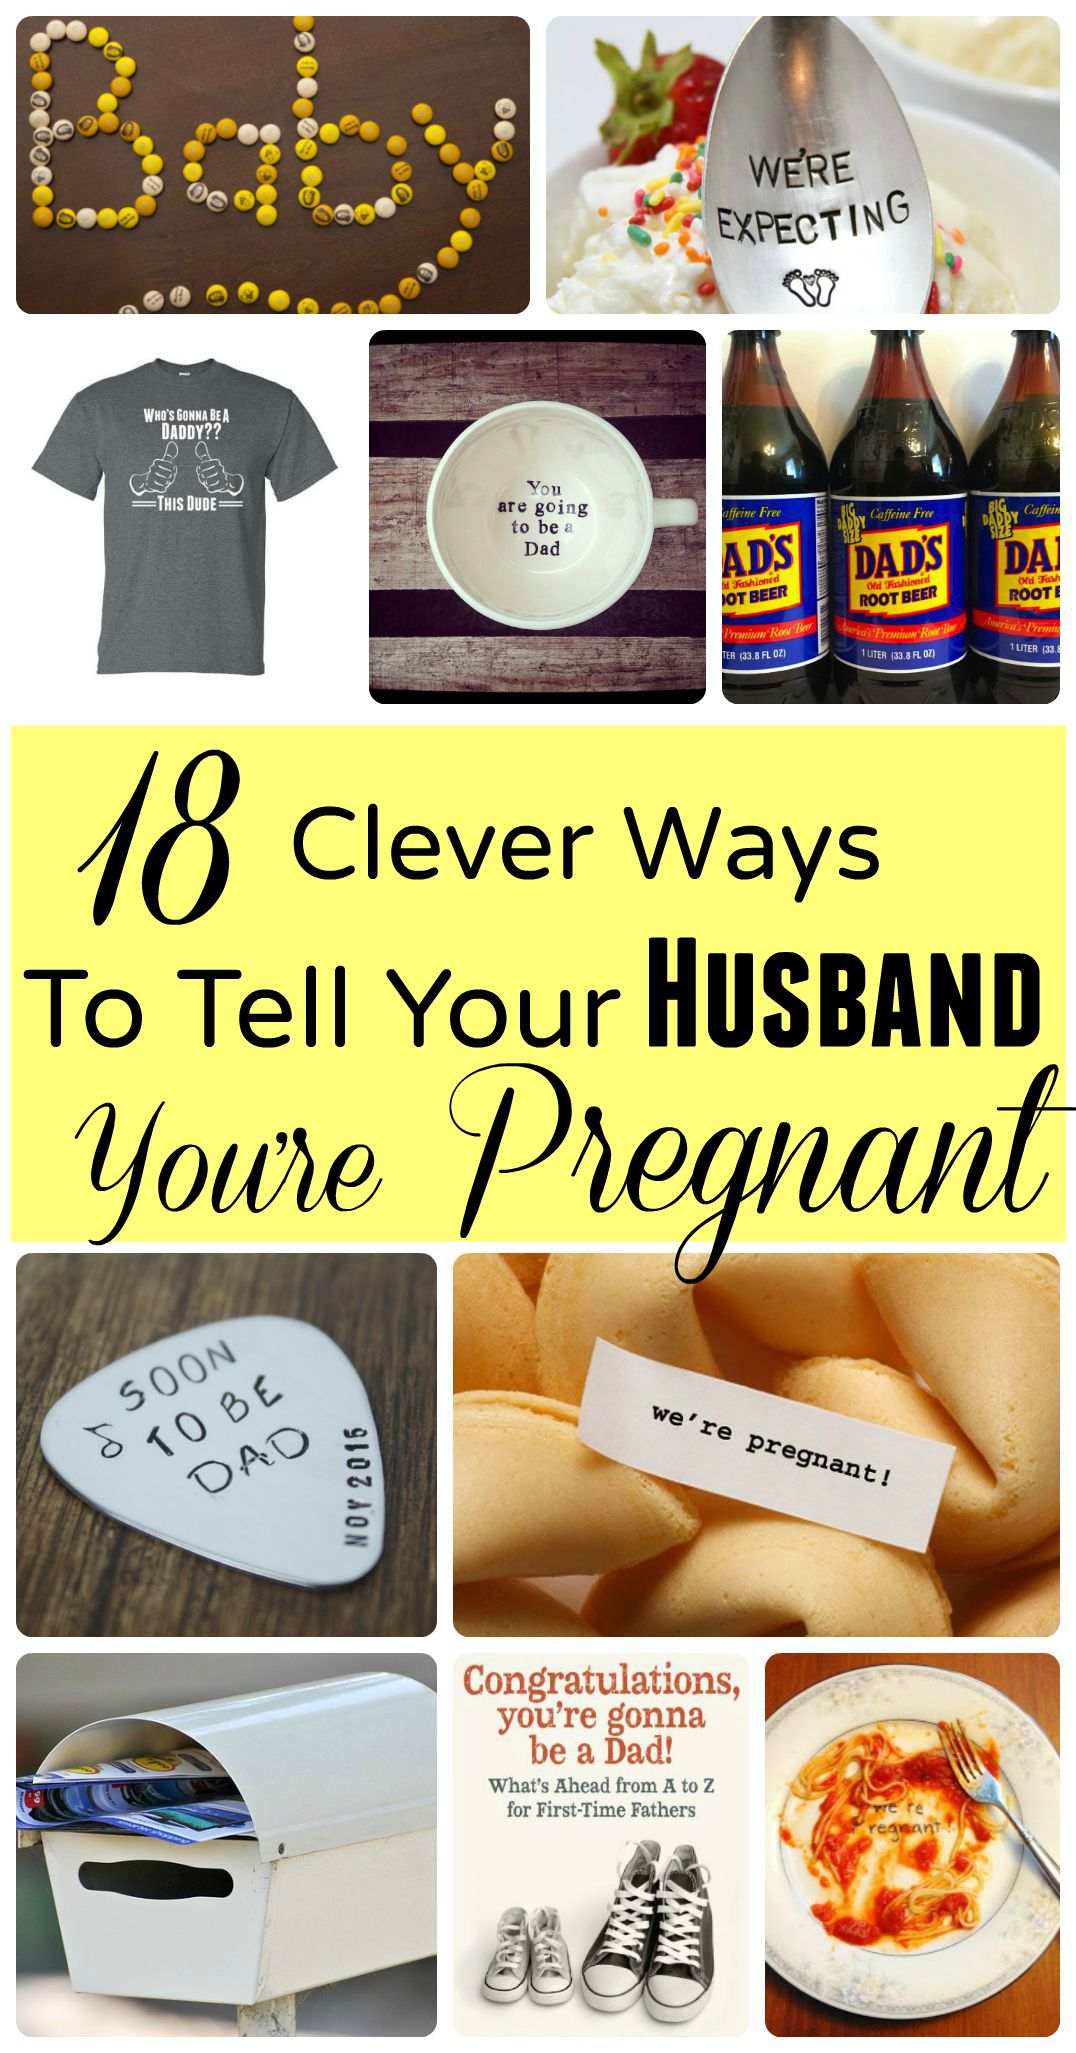 Diy Pregnancy Announcement To Husband